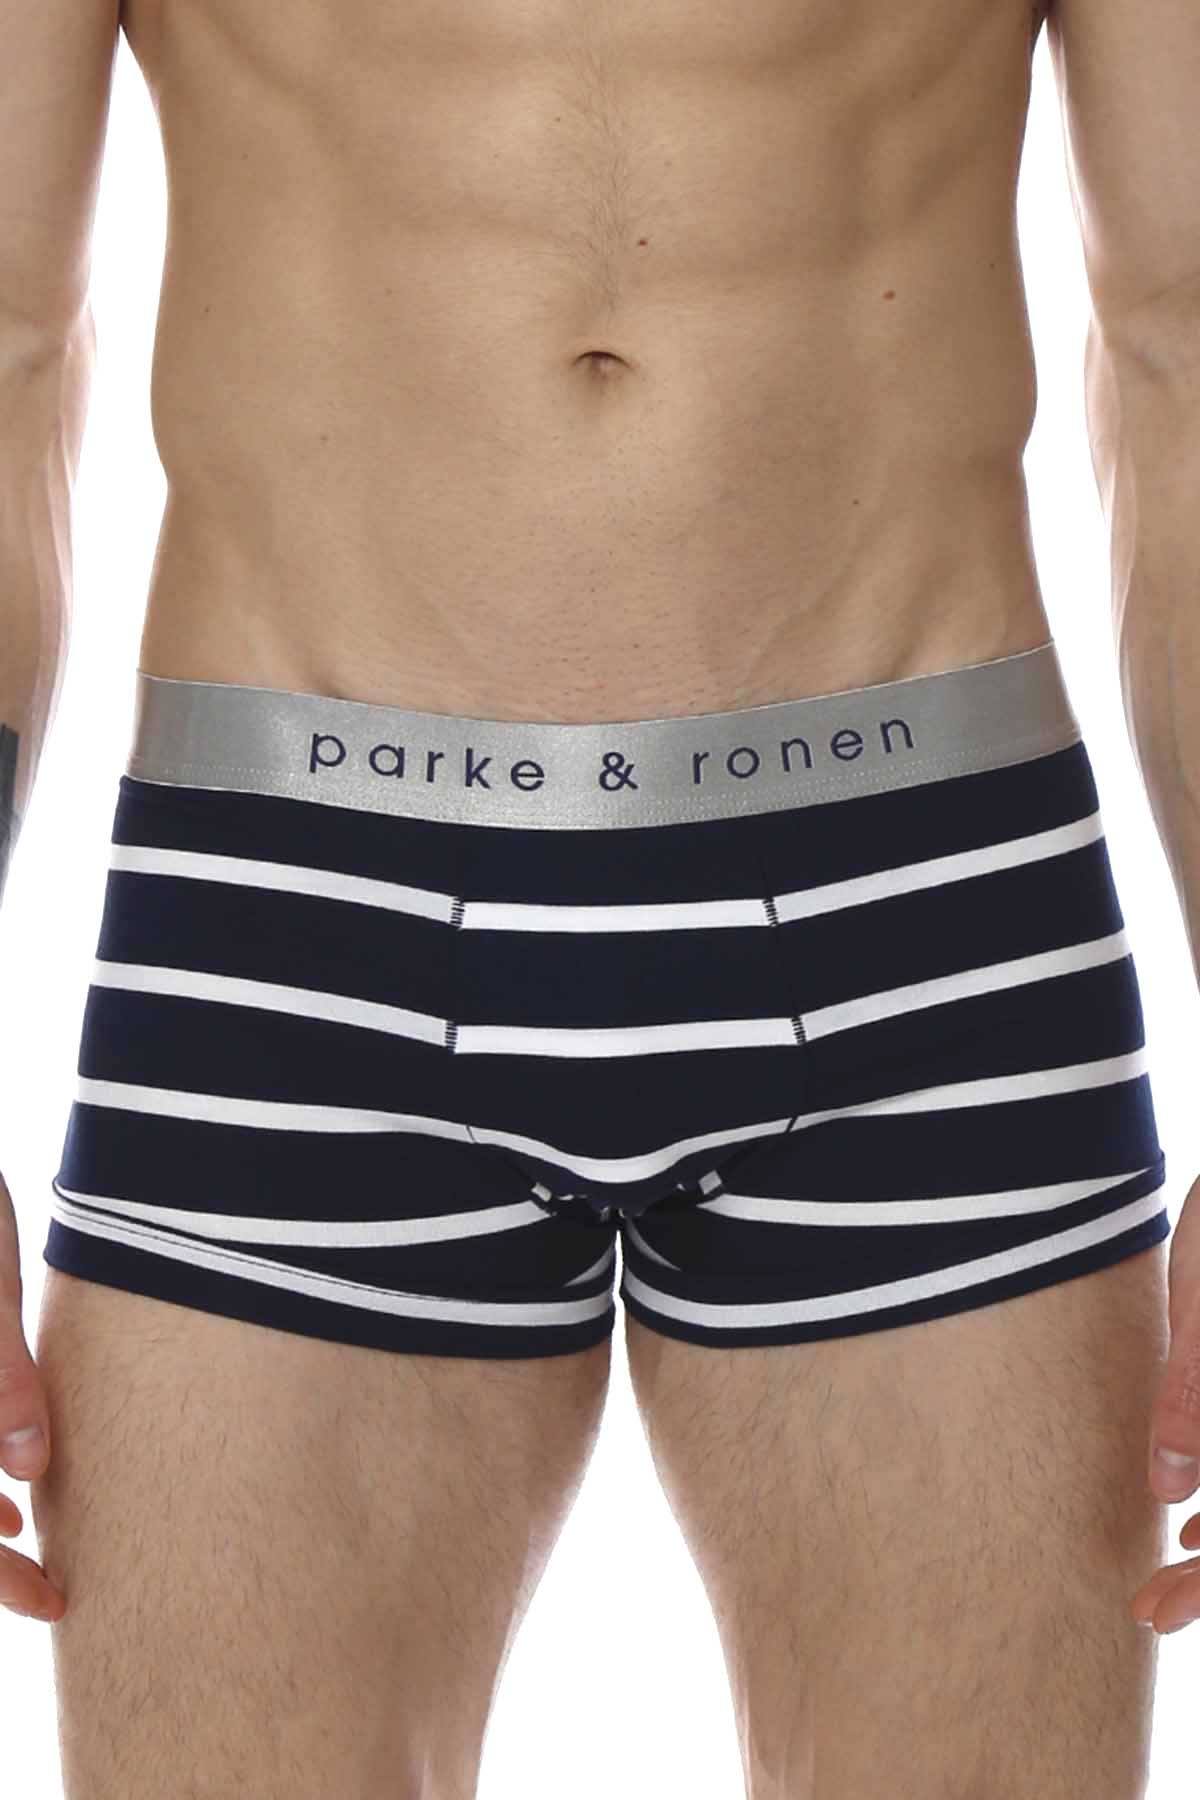 Parke And Ronen Size Chart